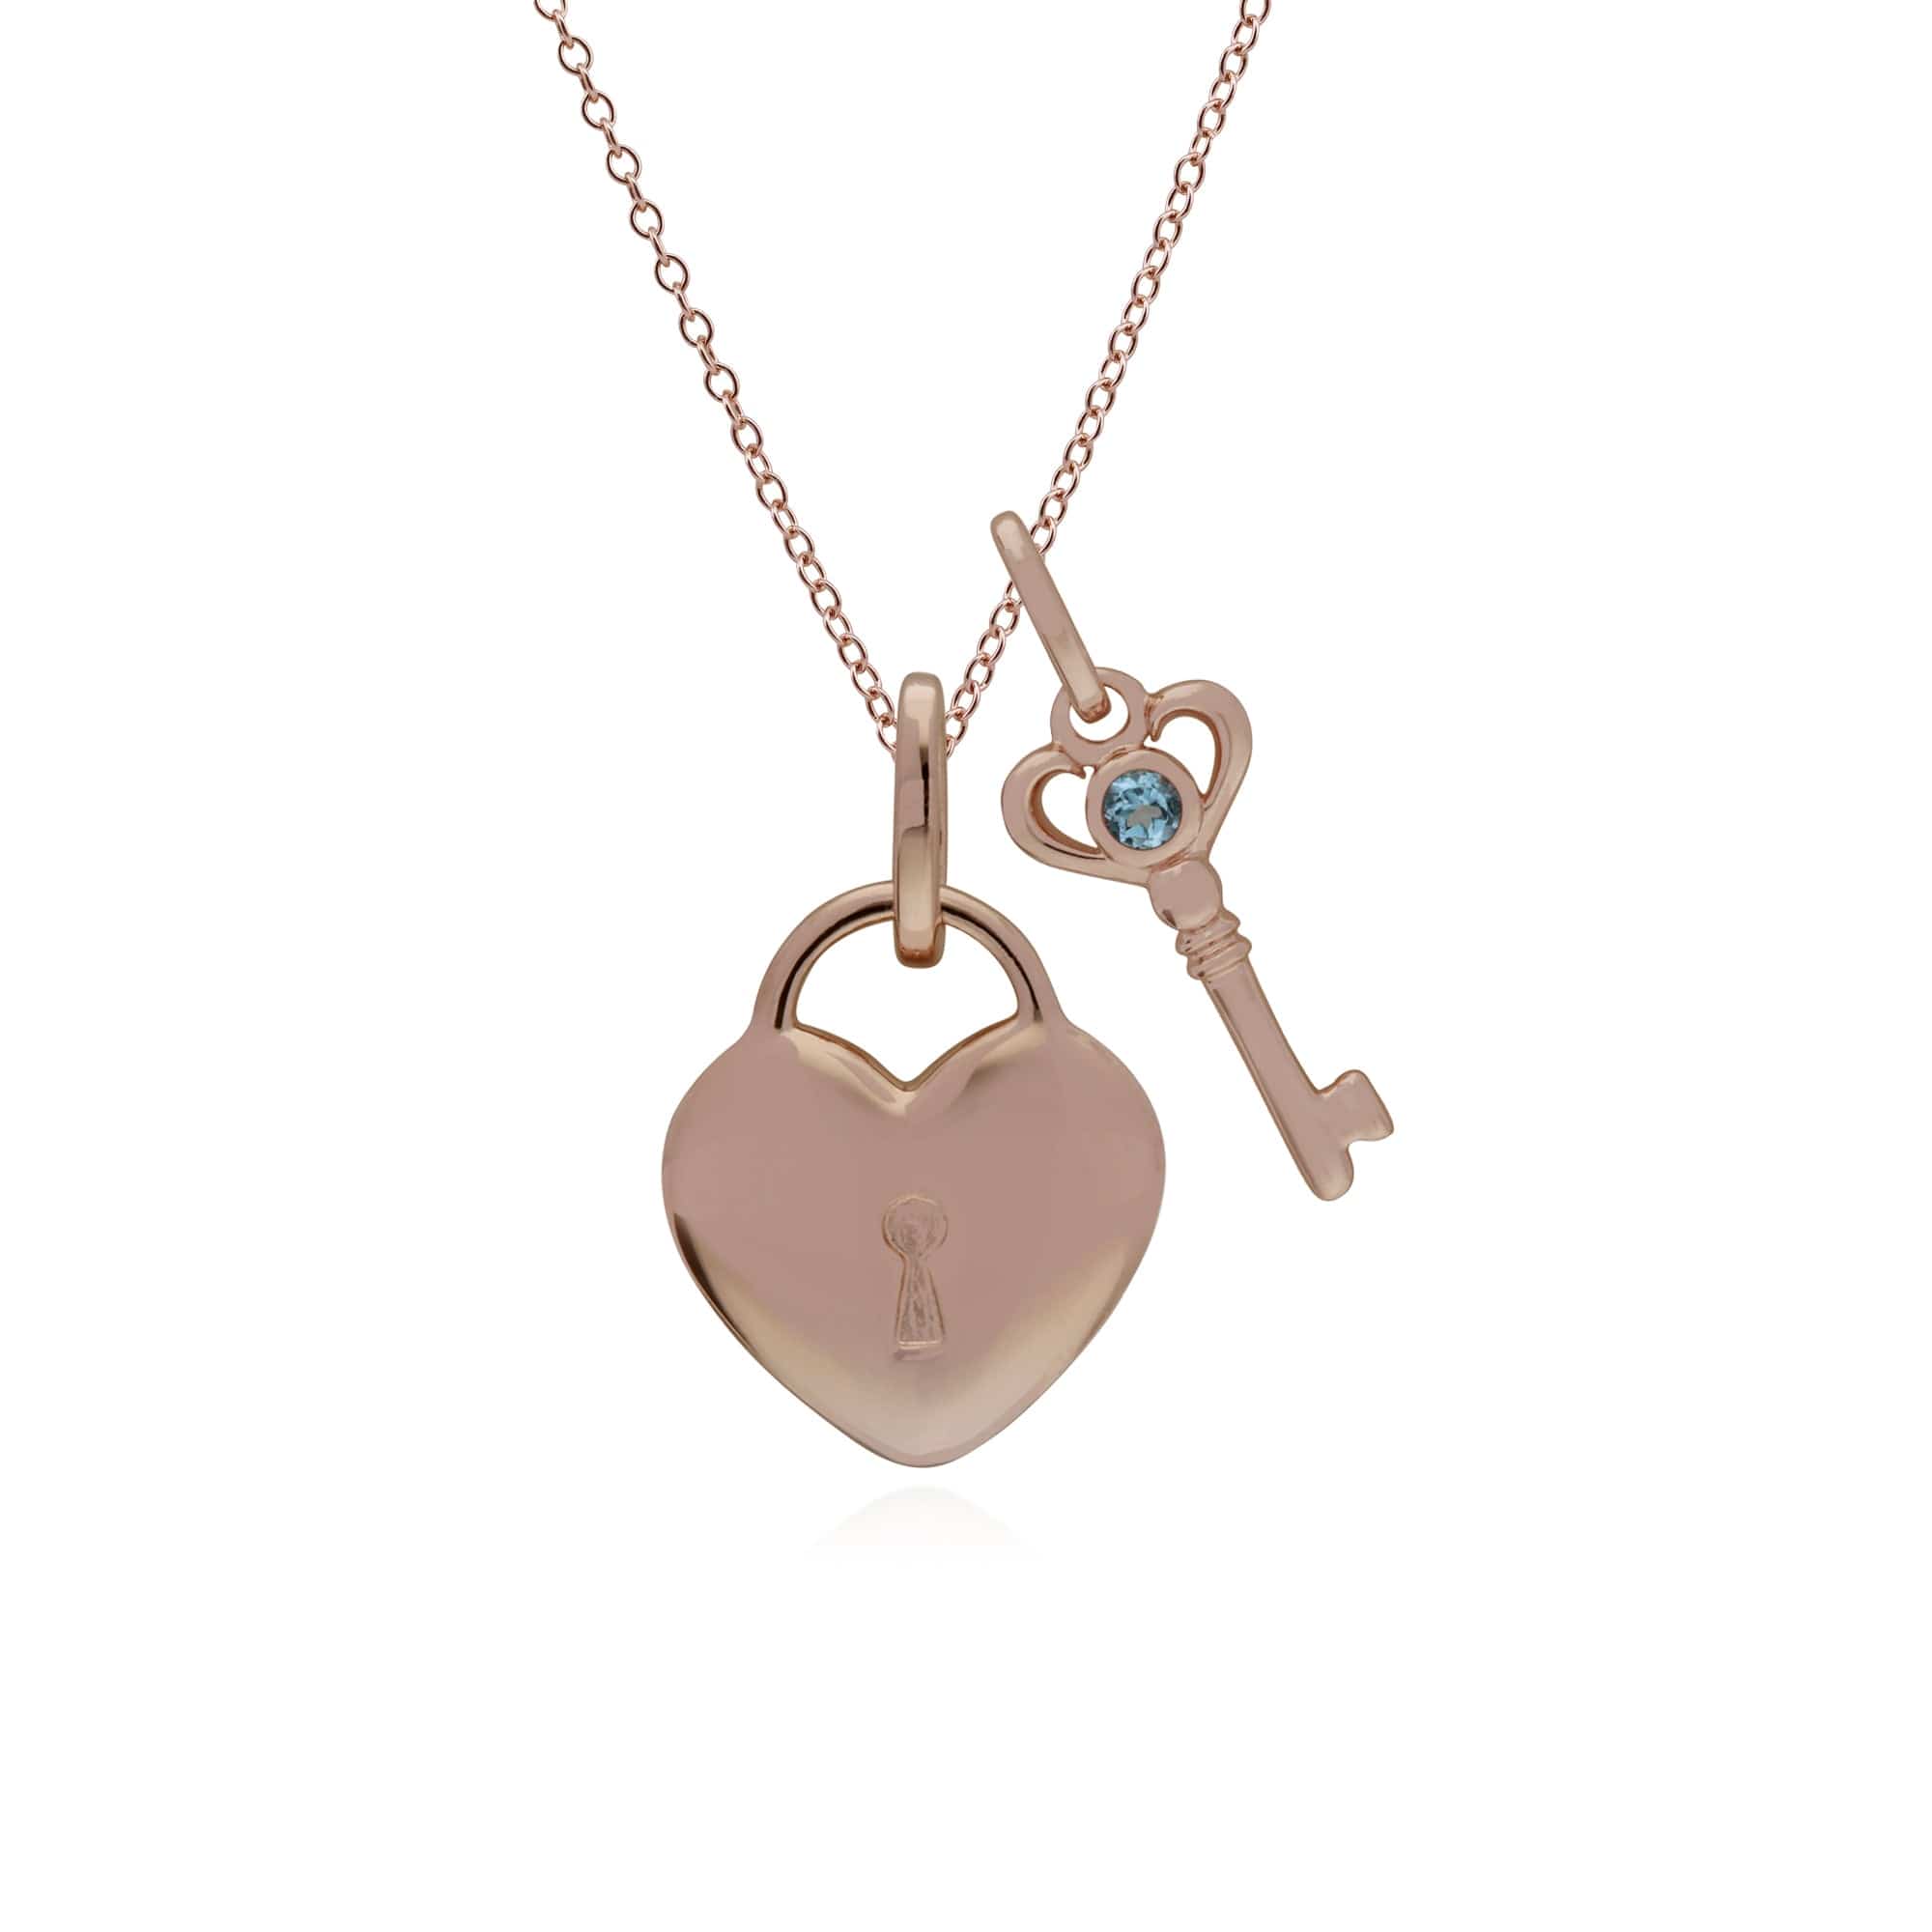 270P026305925-270P026901925 Classic Heart Lock Pendant & Blue Topaz Key Charm in Rose Gold Plated 925 Sterling Silver 1